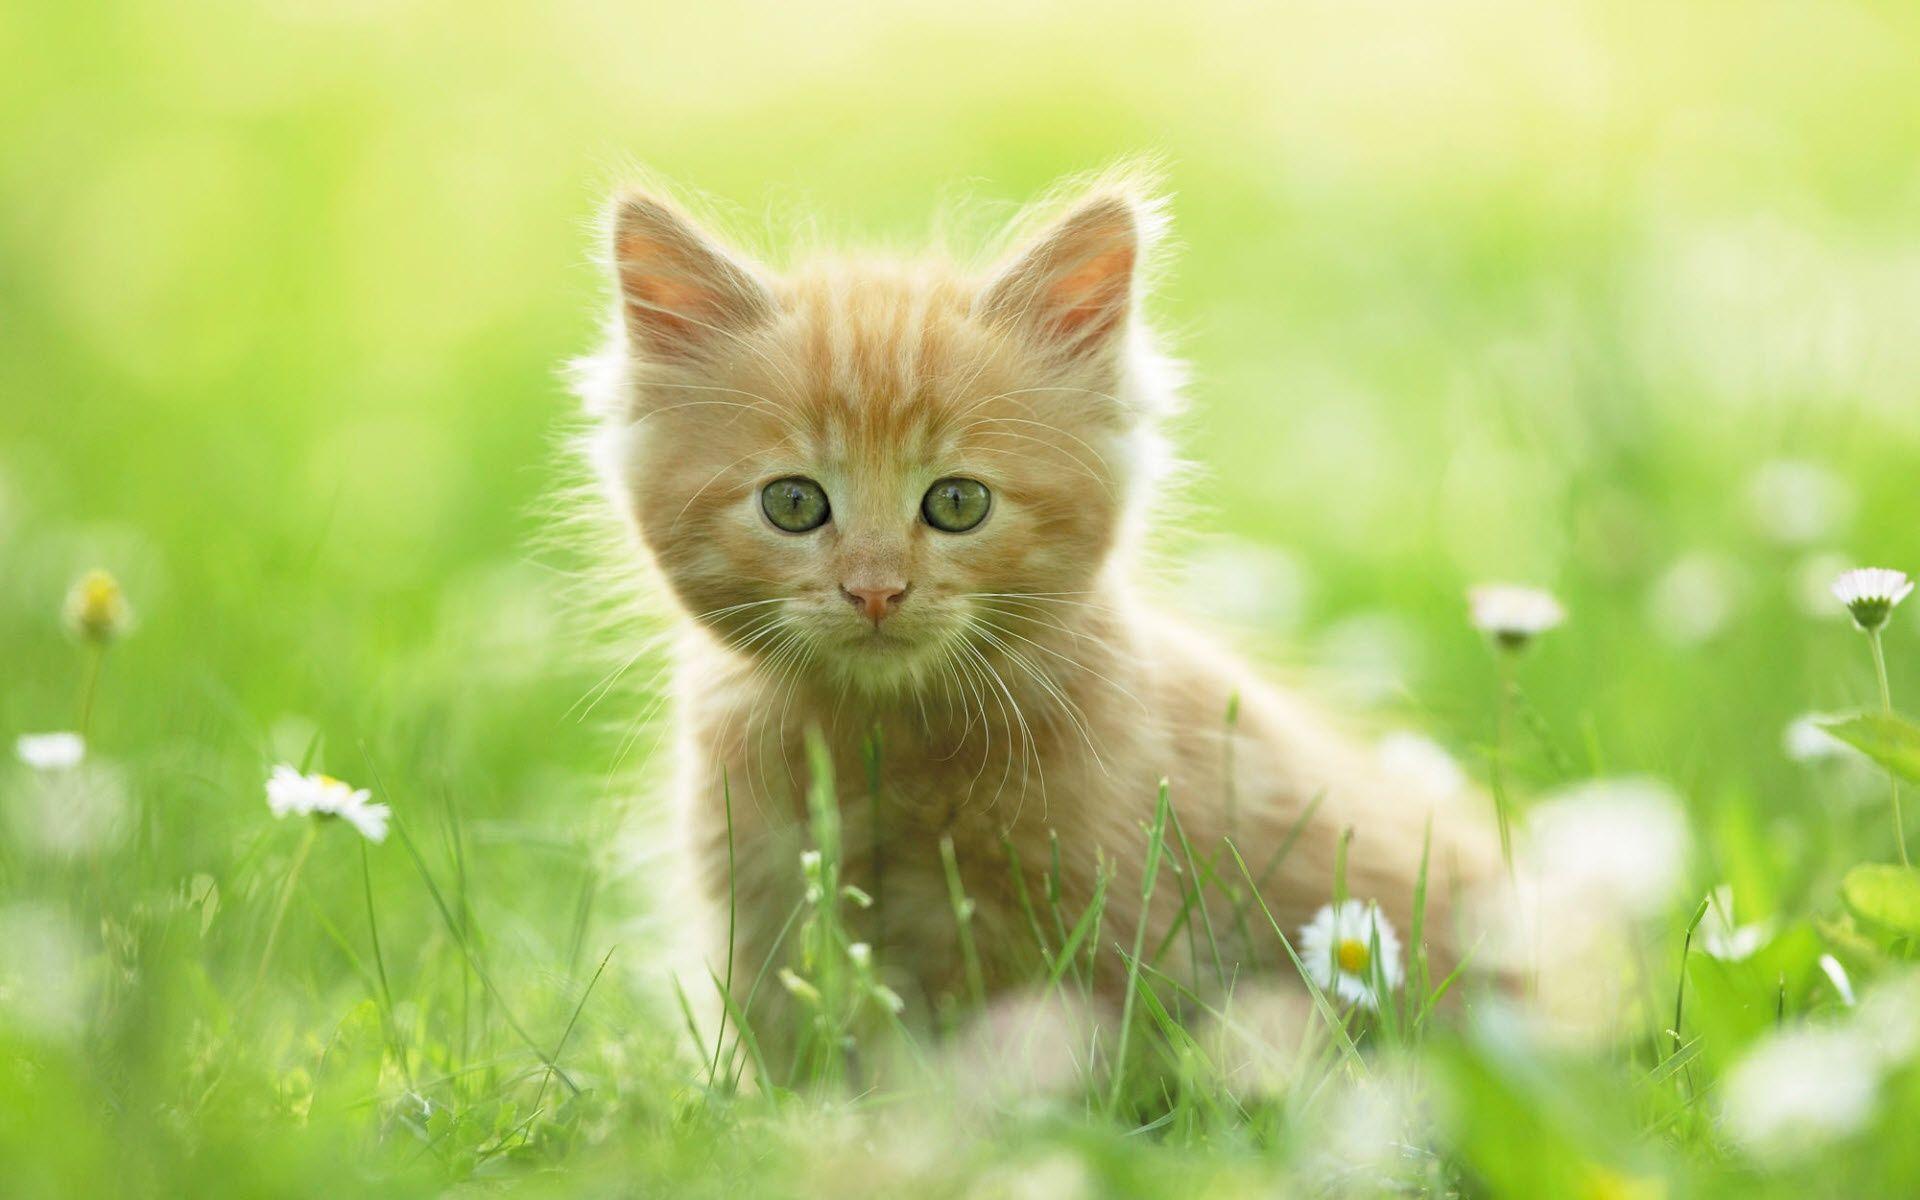 Cute animal wallpaper wallpaper for free download about 668